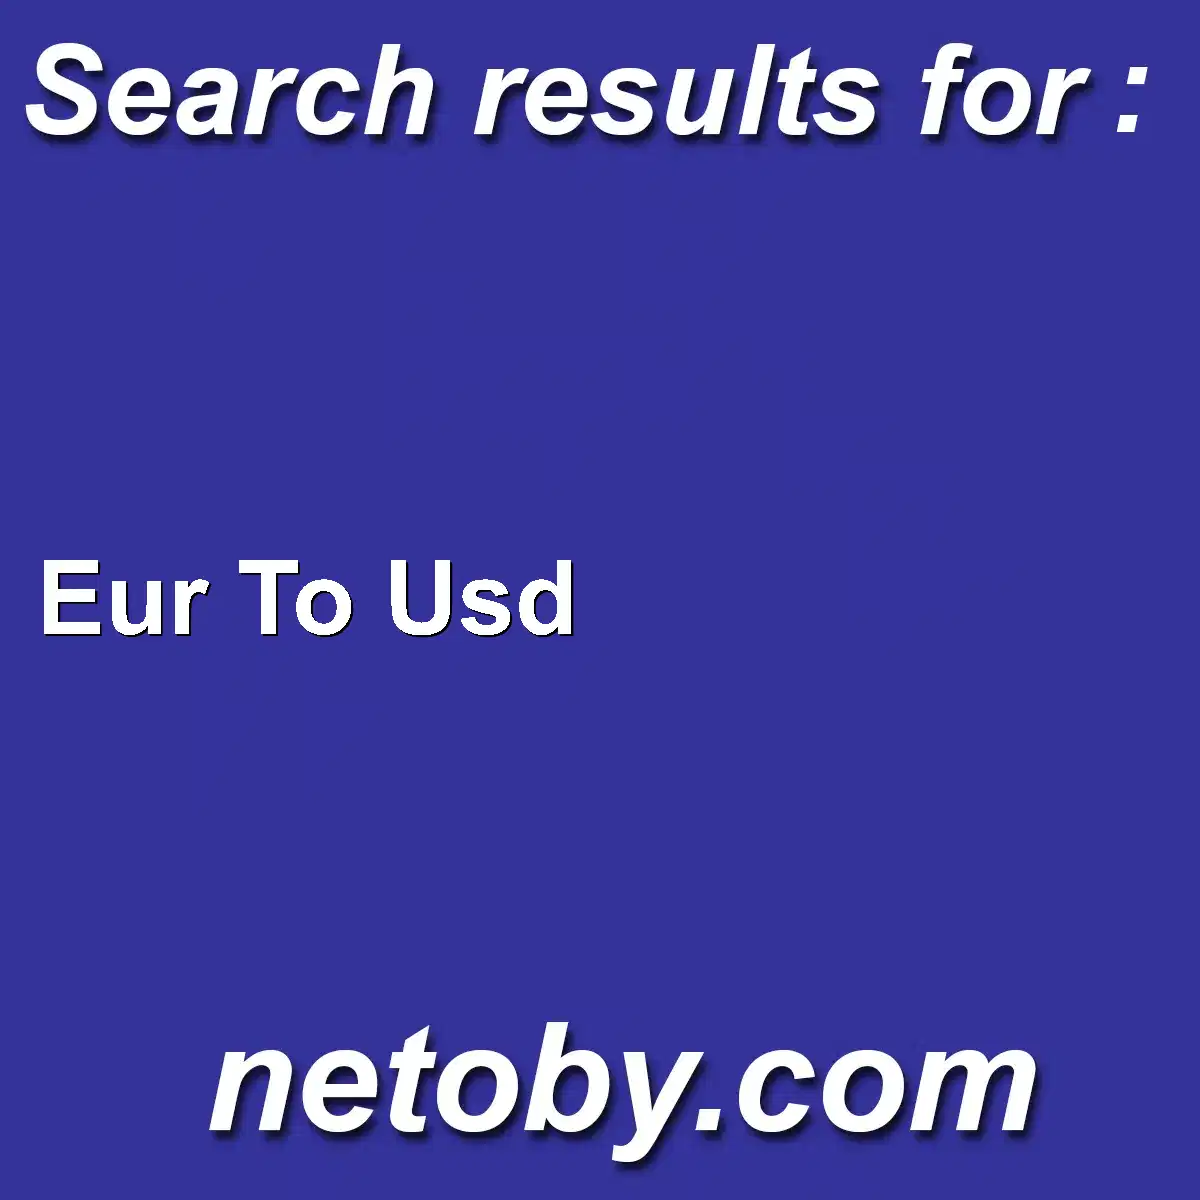 ﻿Eur To Usd